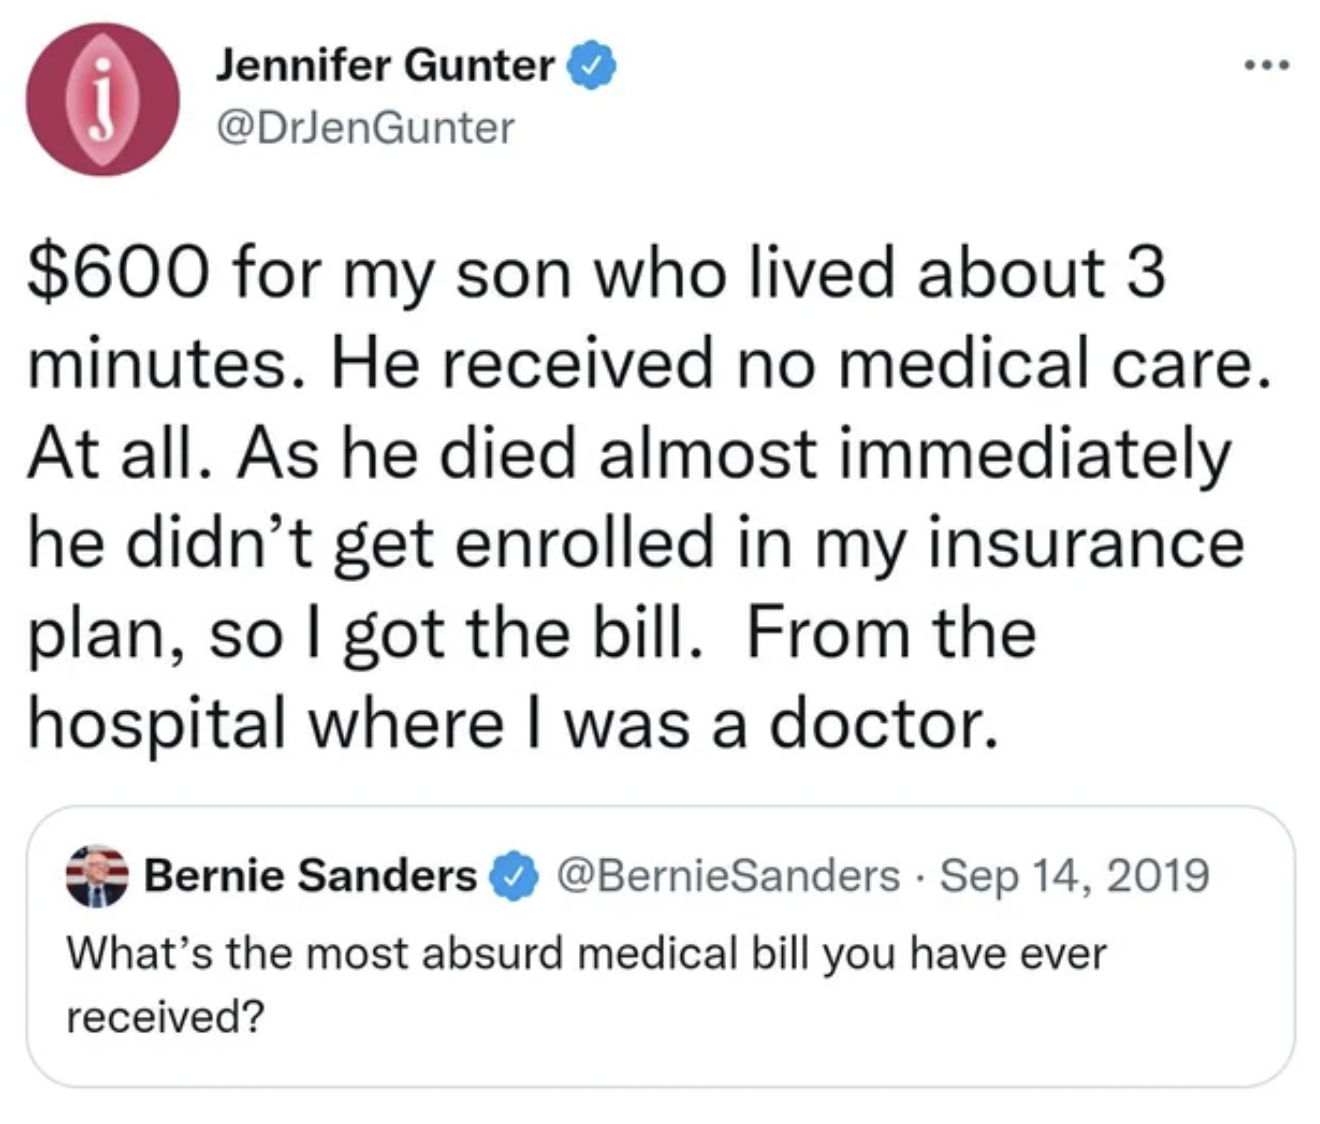 Fails and Facepalms - paper -  for my son who lived about 3 minutes. He received no medical care. At all. As he died almost immediately he didn't get enrolled in my insurance plan, so I got the bill. From the hospital where I was a doctor. Bernie Sanders